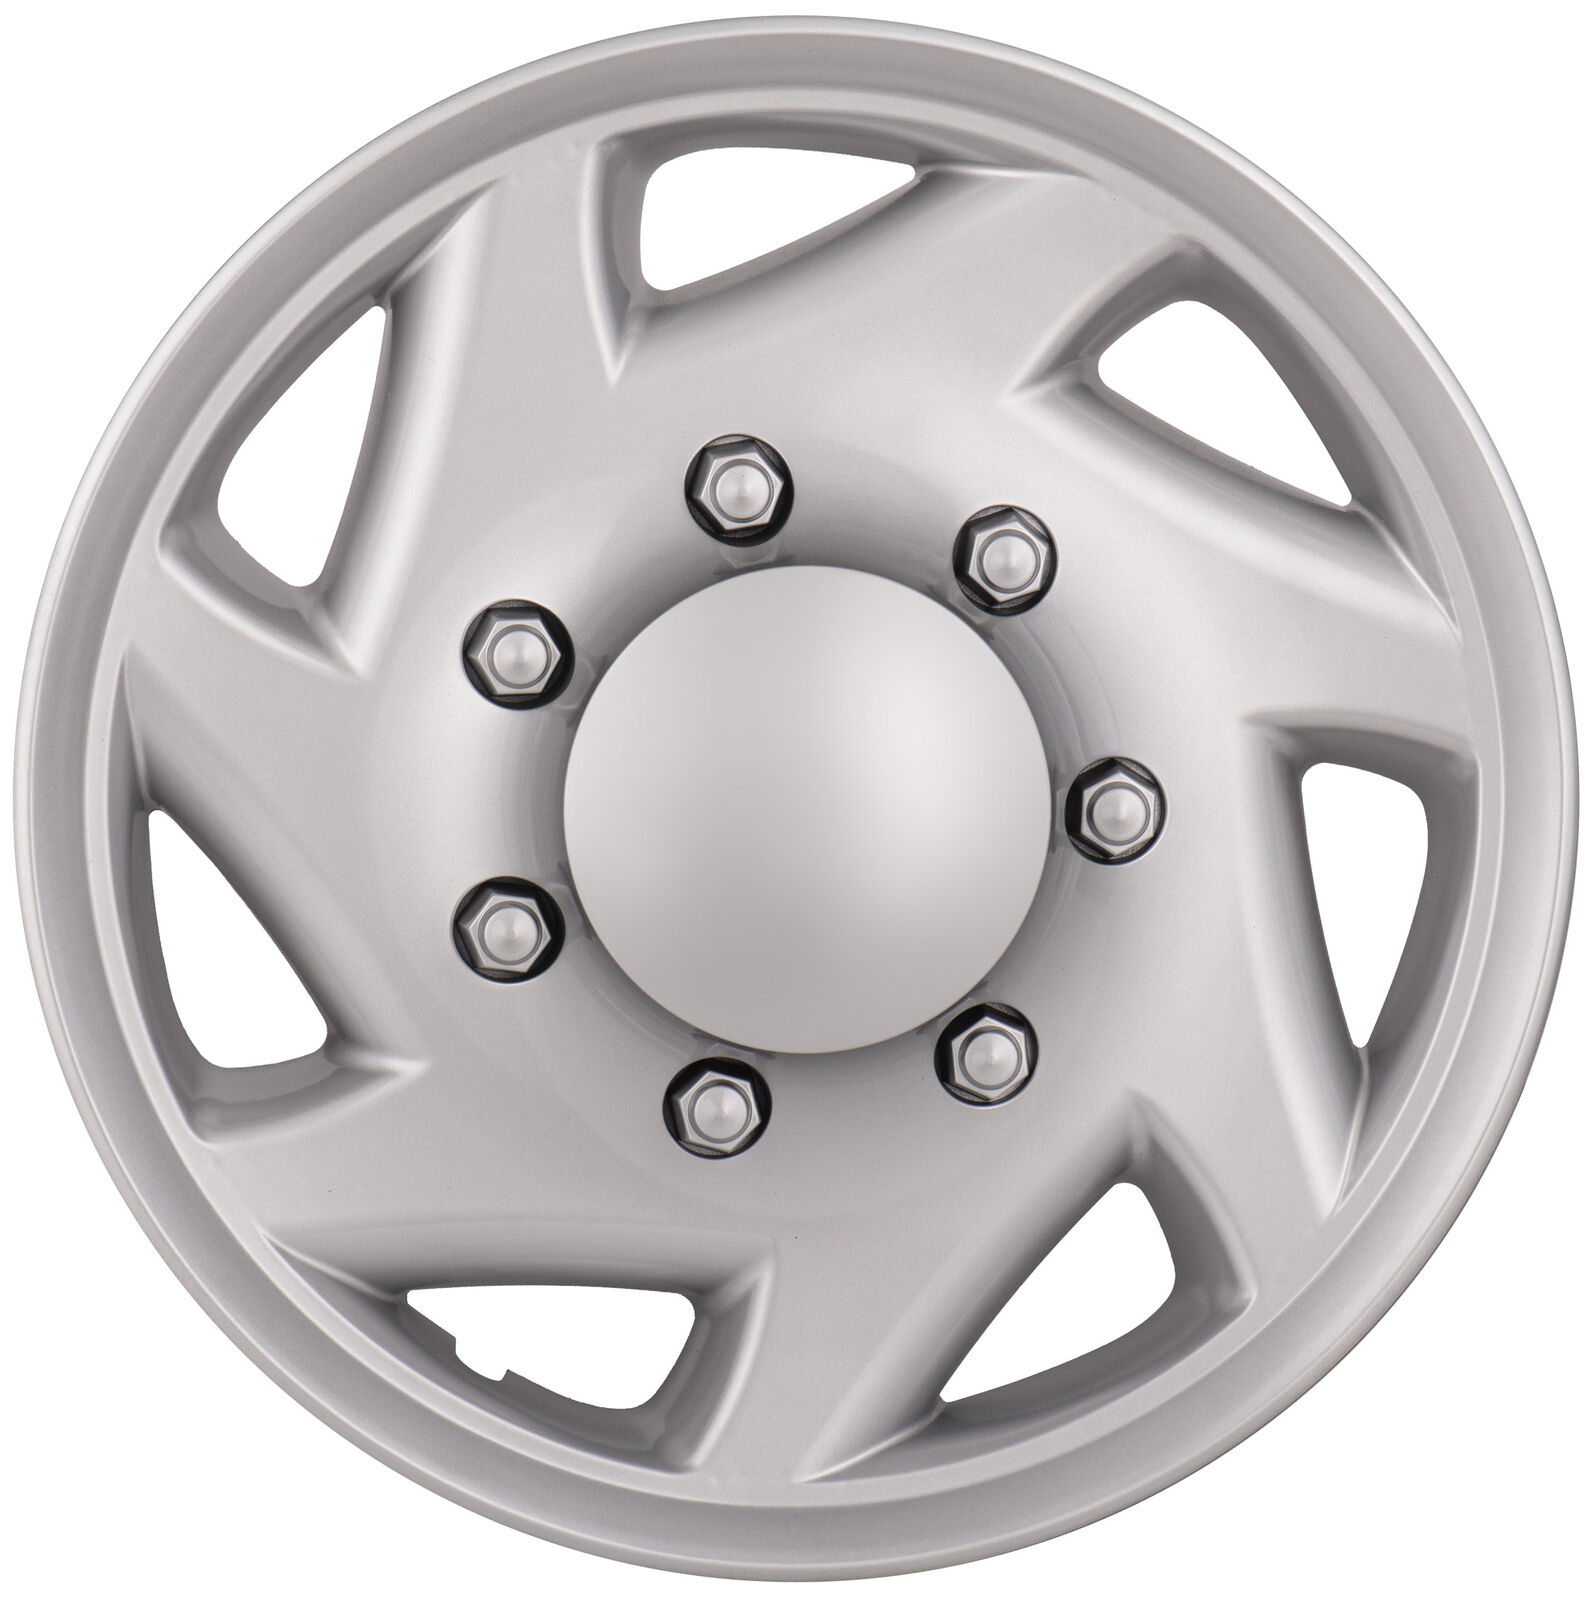 NEW Hubcap for Ford Van 1998-2023, Premium 16-inch Heavy Duty Snap-On (1 Piece)